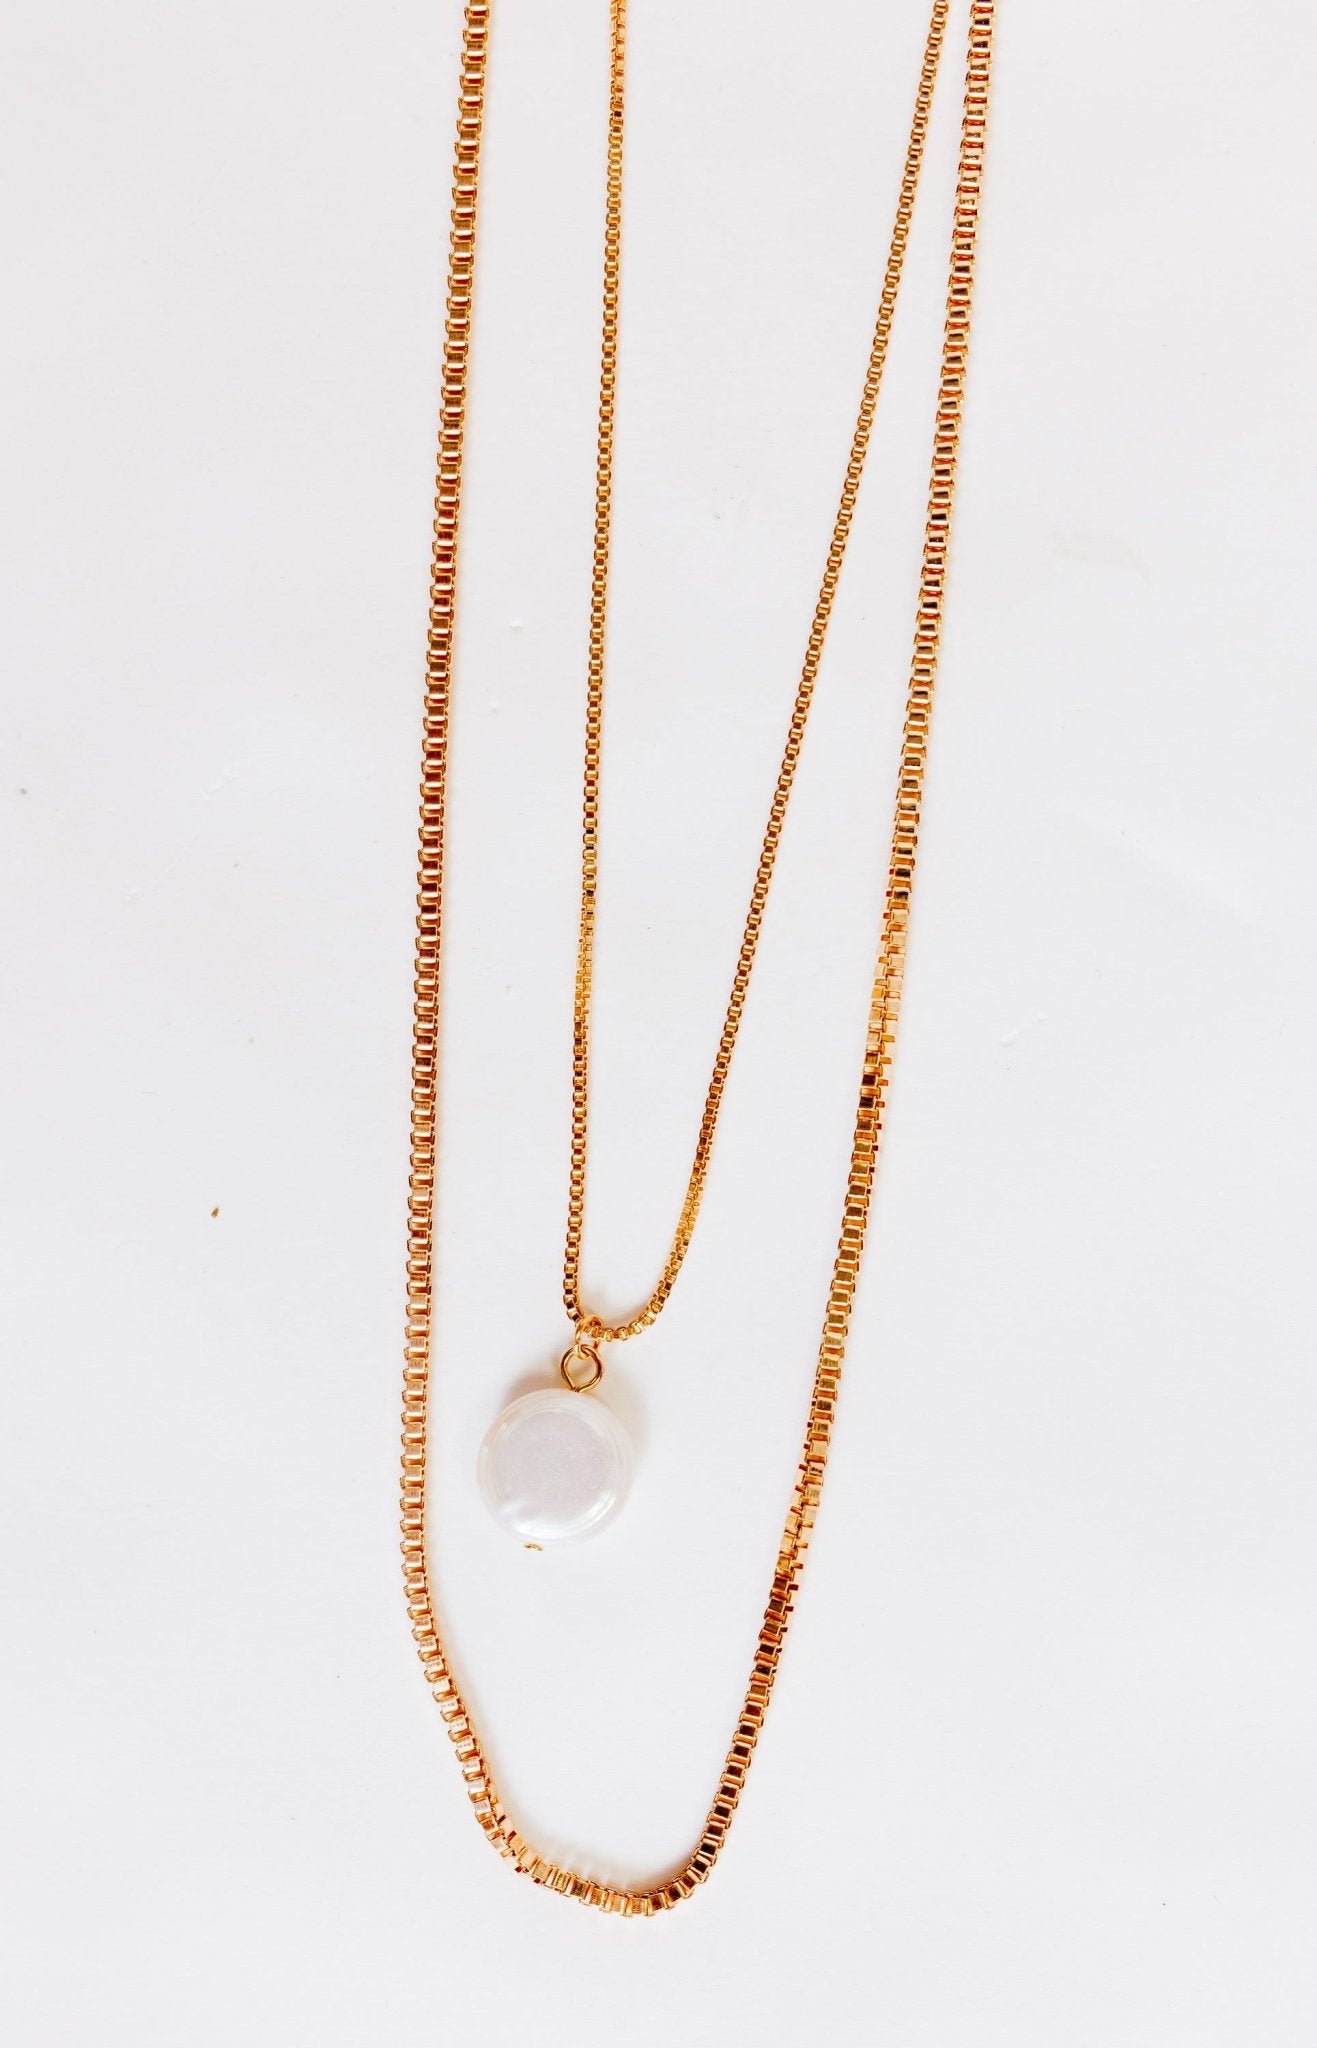 Box Chain 2 Layer Necklace, GOLD Necklaces - 56N